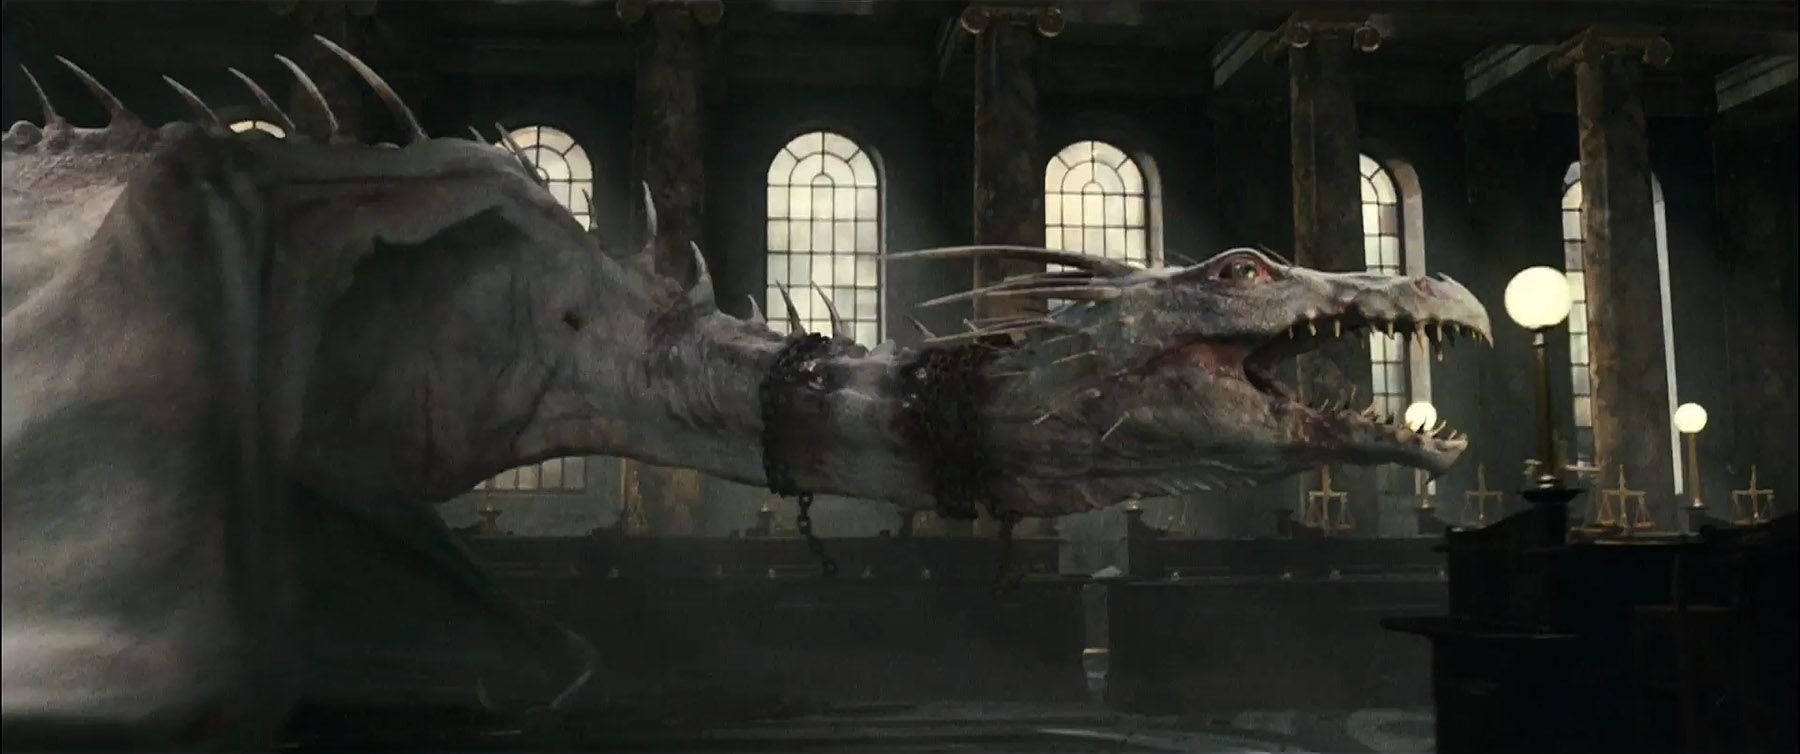 The blind and pale dragon from Harry Potter and the Deathly Hallows